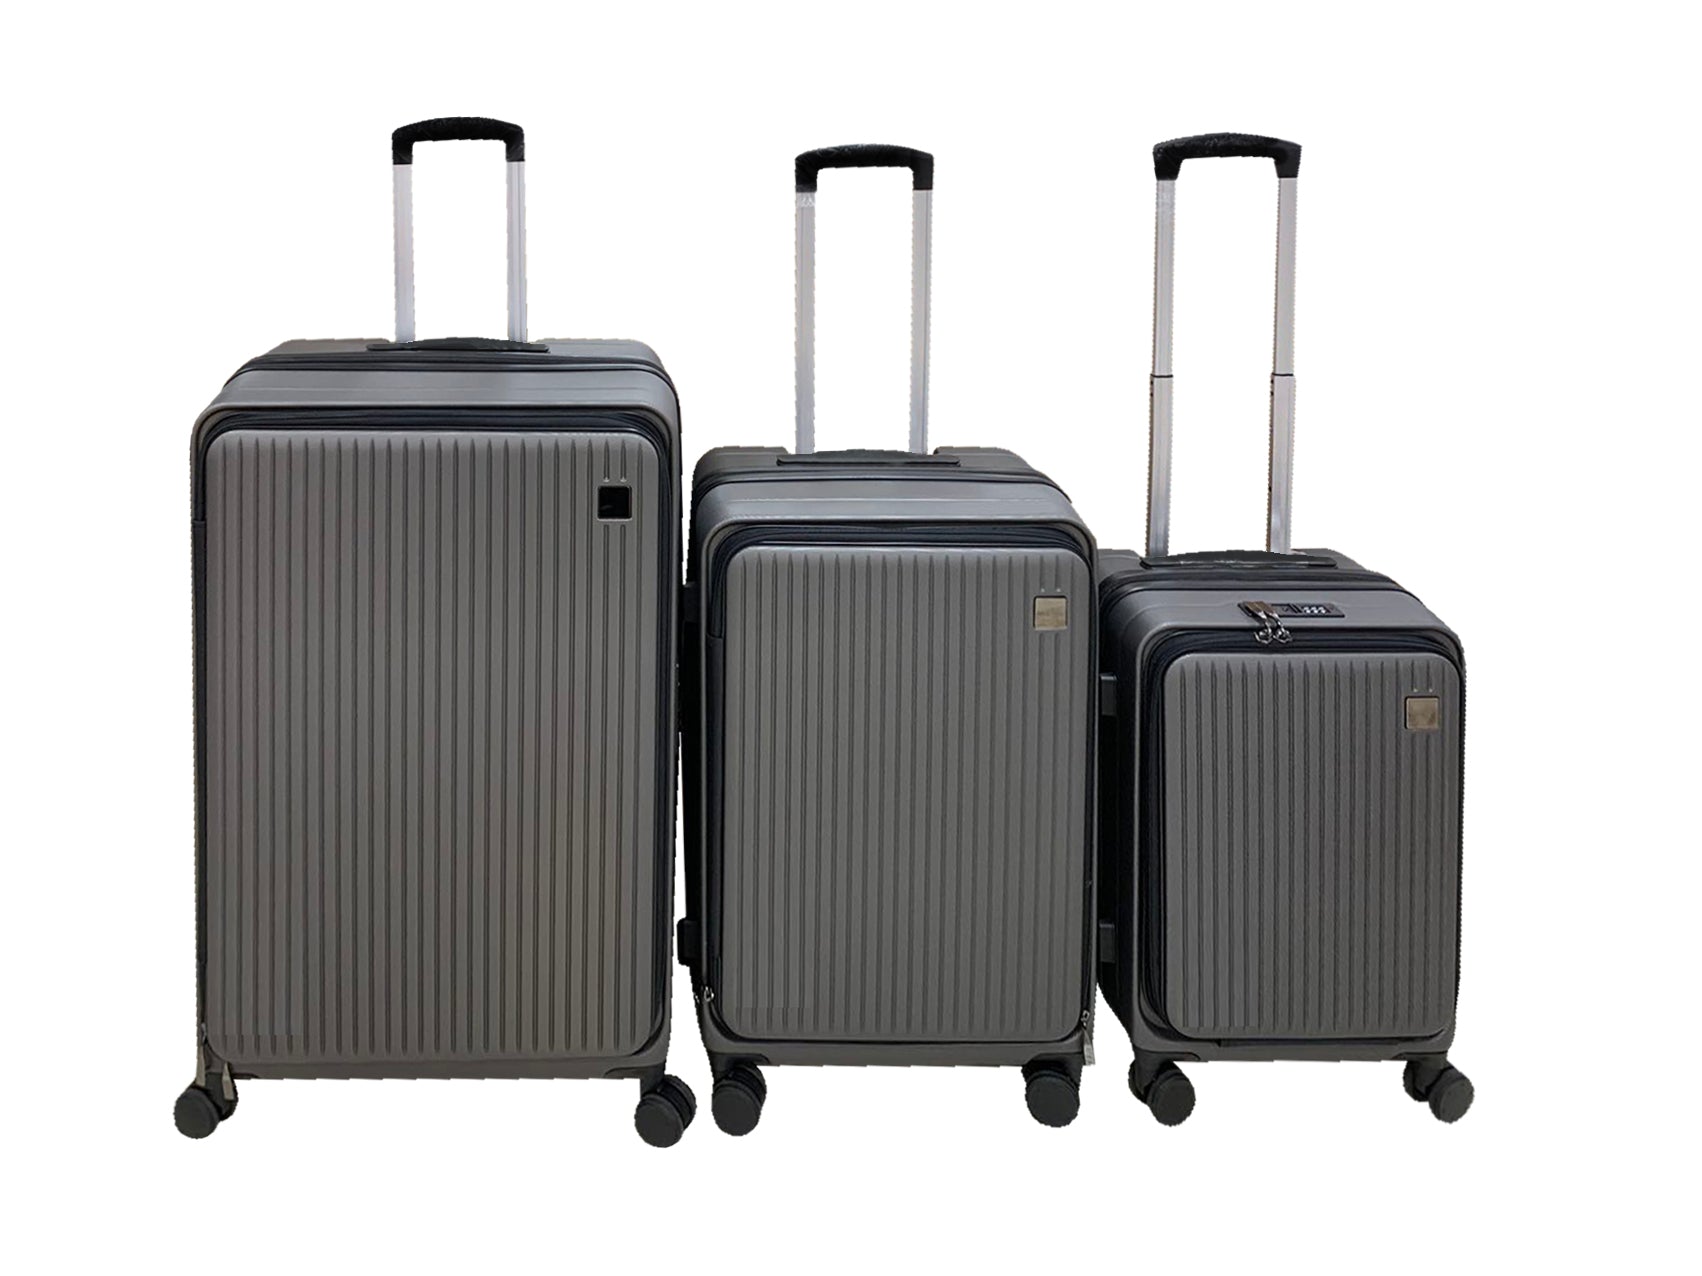 3-piece Front Open Luggage Set - Grey